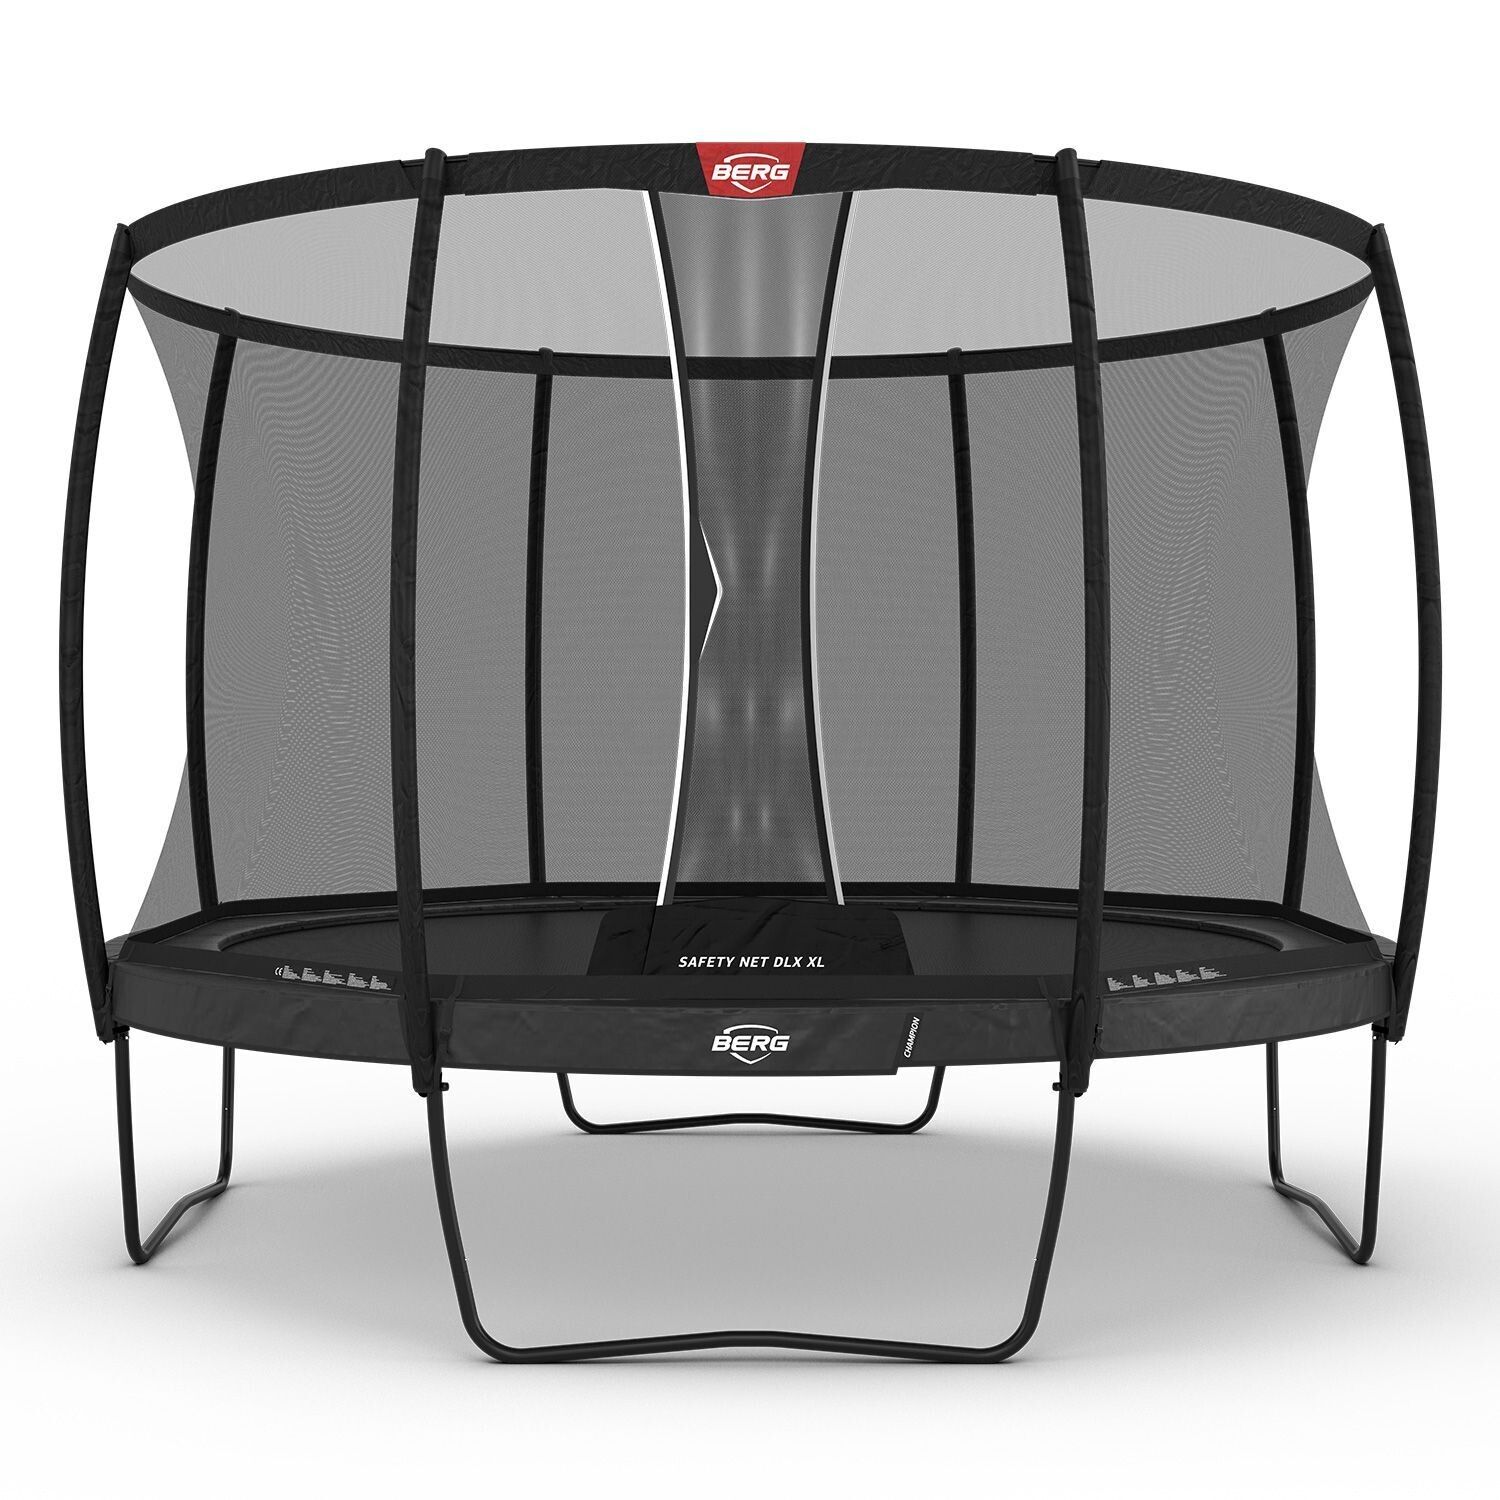 BERG Champion Regular 430/14ft + Safety Net Deluxe XL, Size: 430/14ft, Colour: Grey